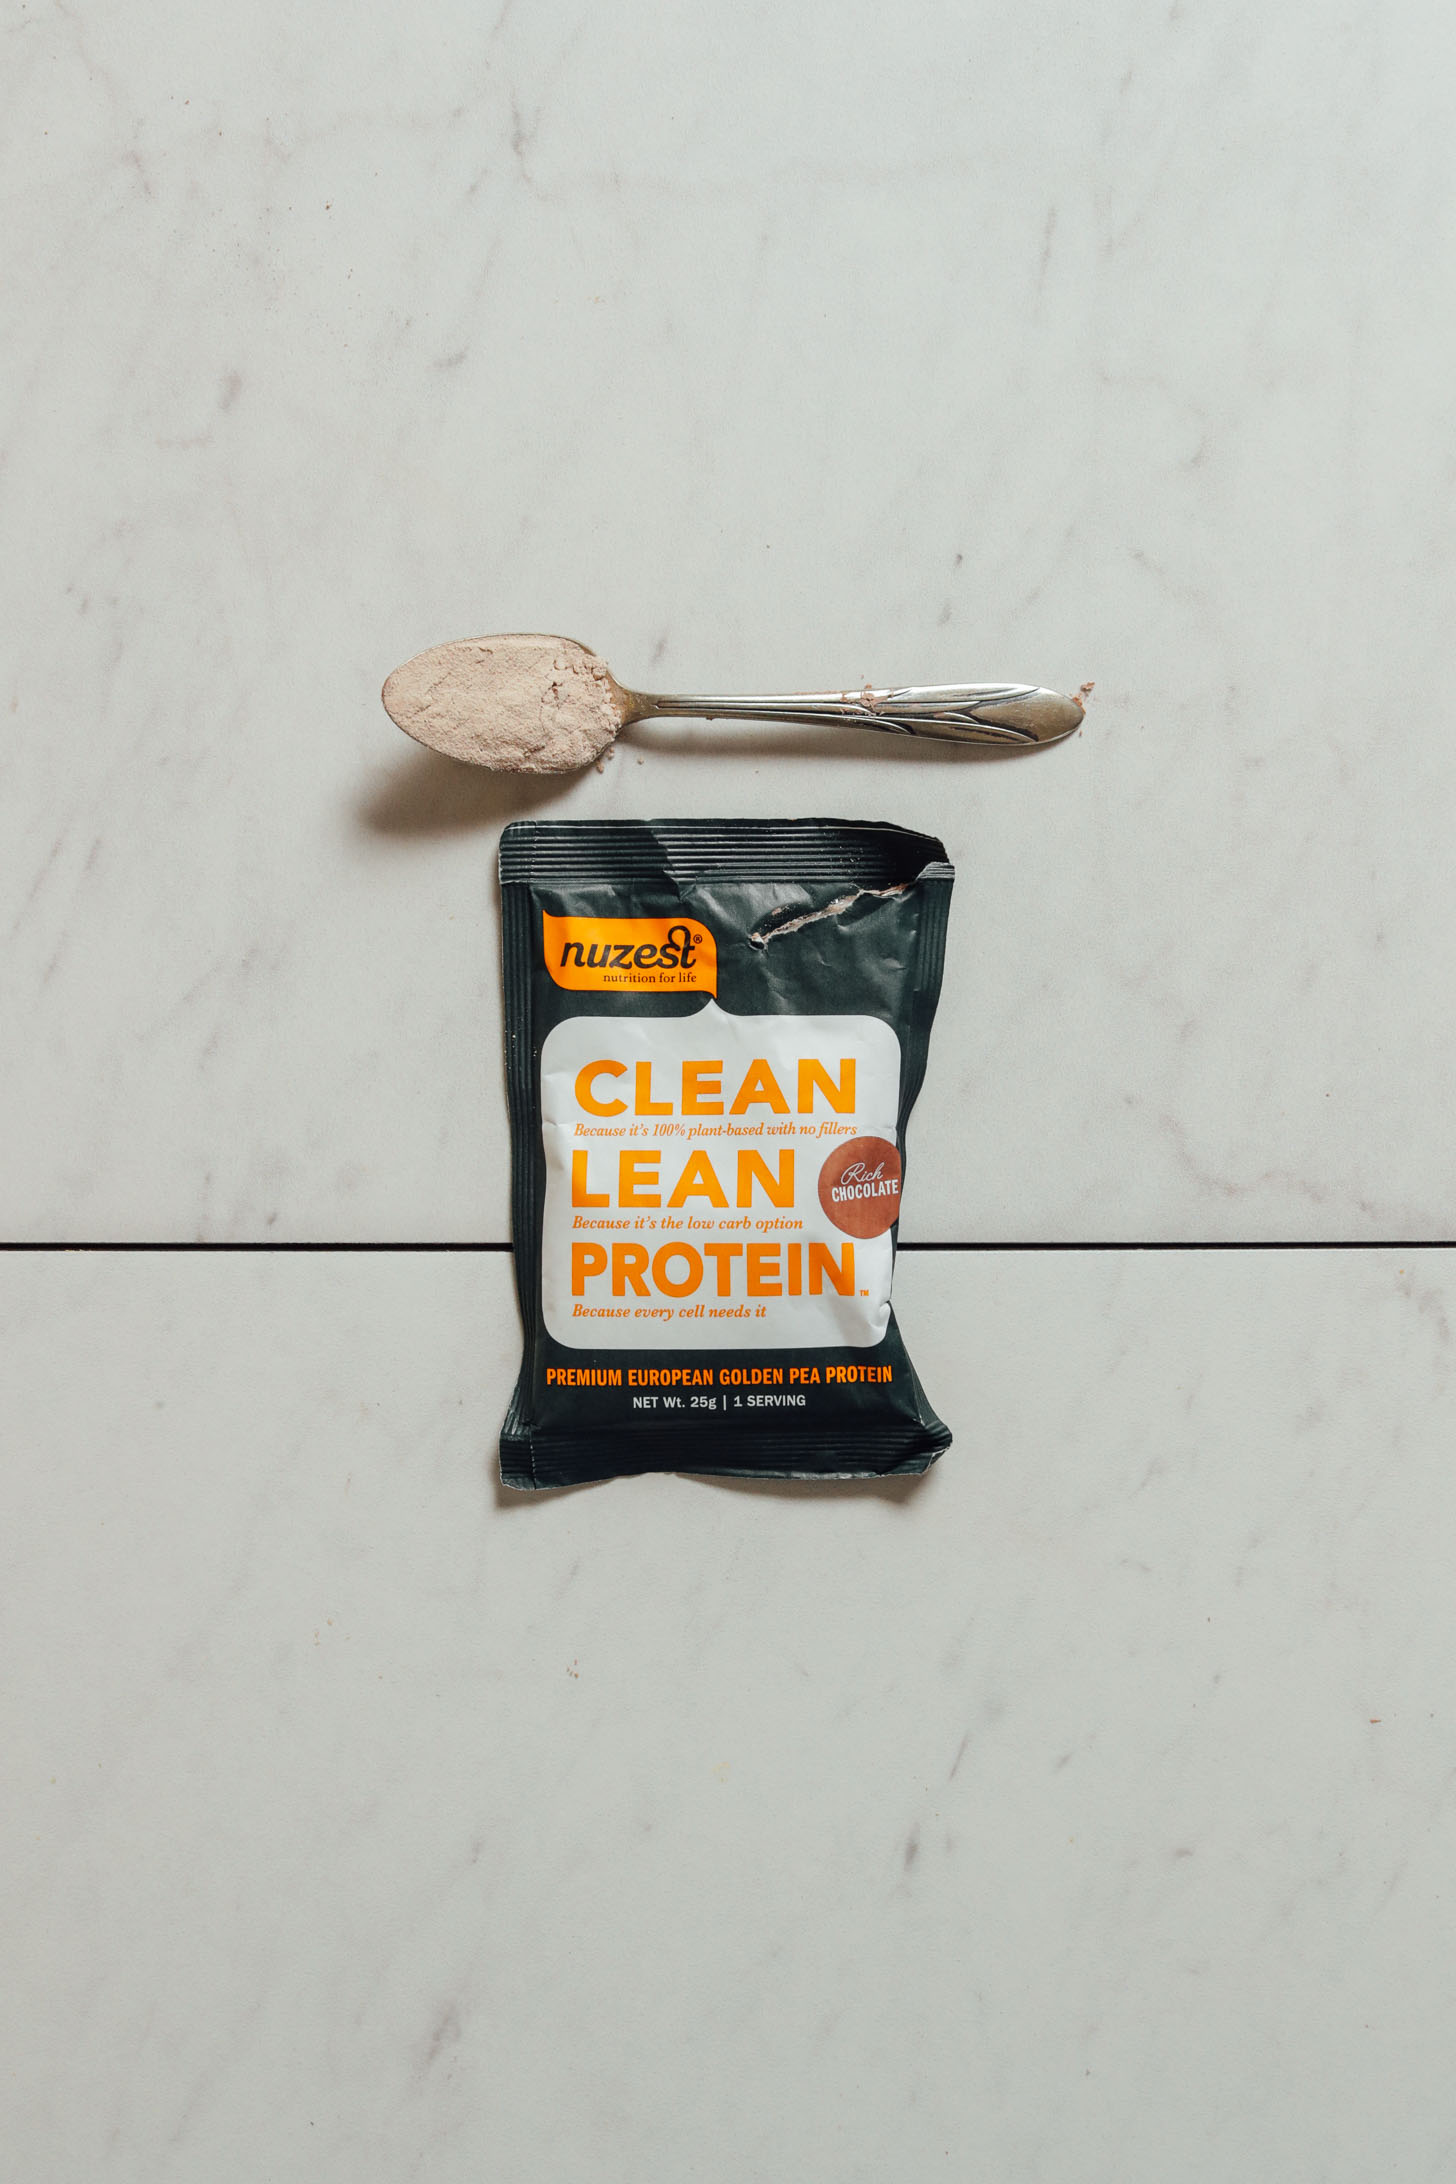 Pouch of Nuzest Chocolate Protein Powder for our vegan protein powder review